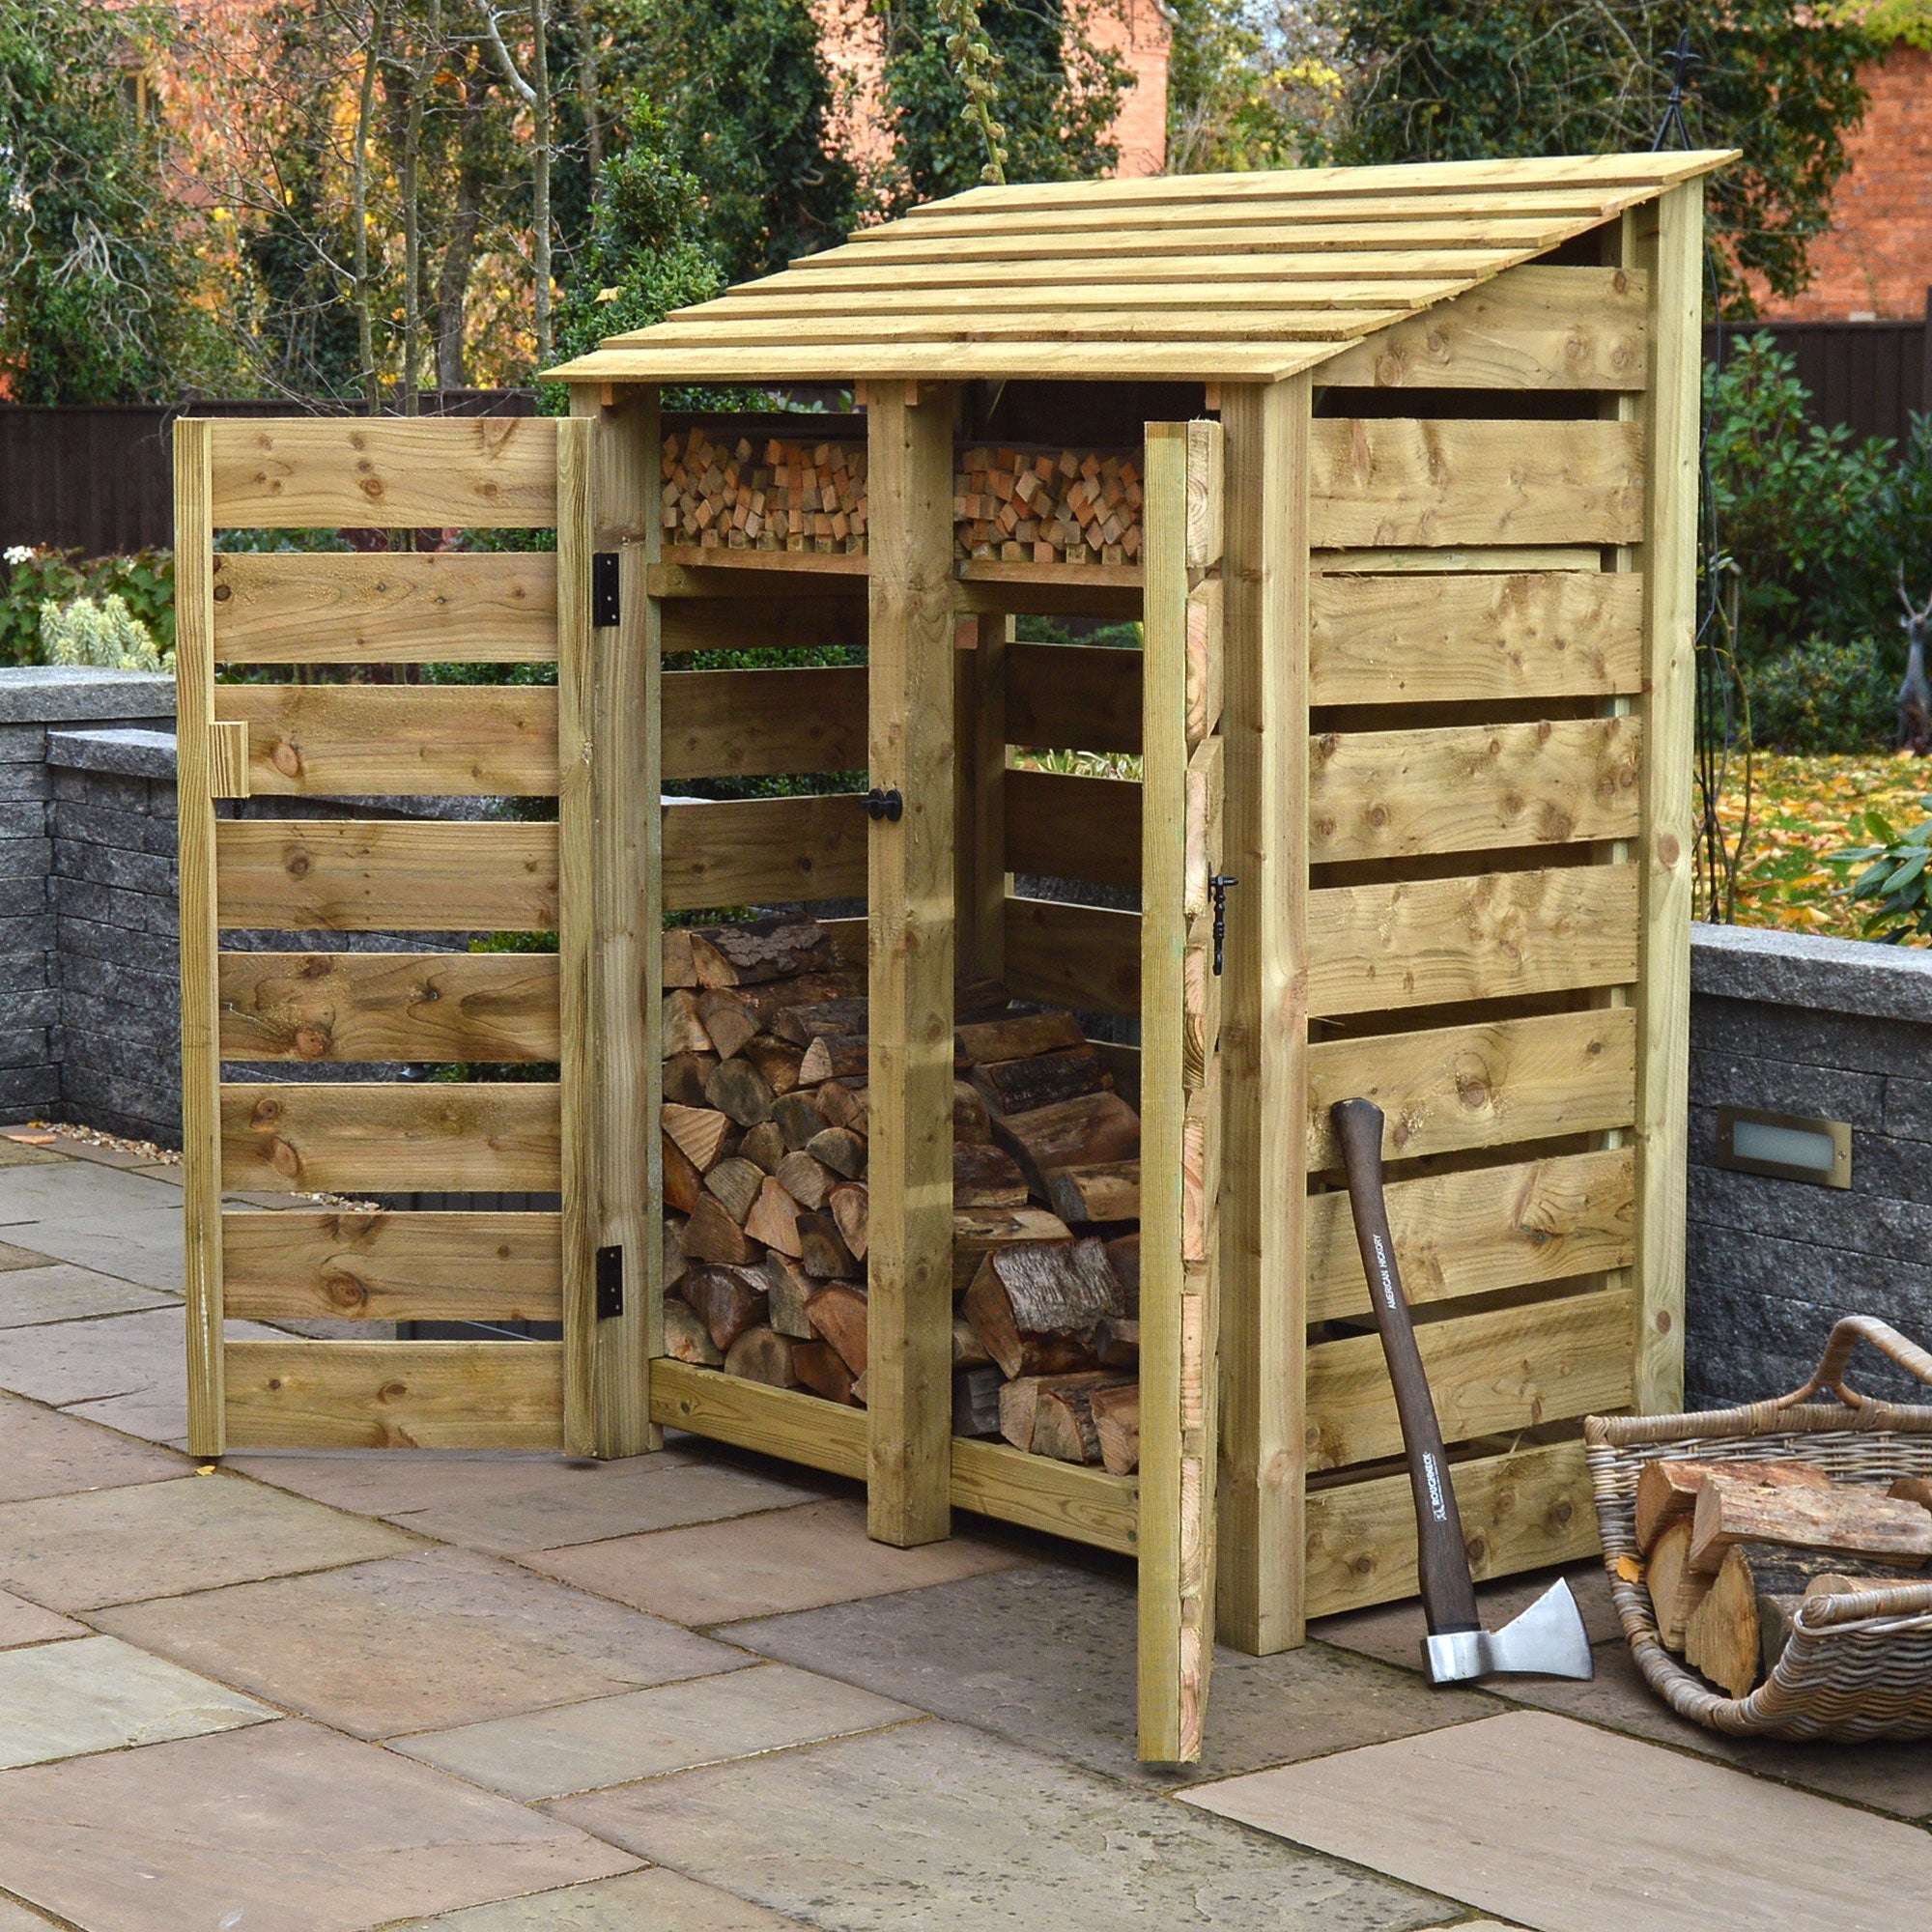 Rutland Country Cottesmore Log Store with Door and Kindling Shelf - 6ft:Rutland County,Exceptional Garden